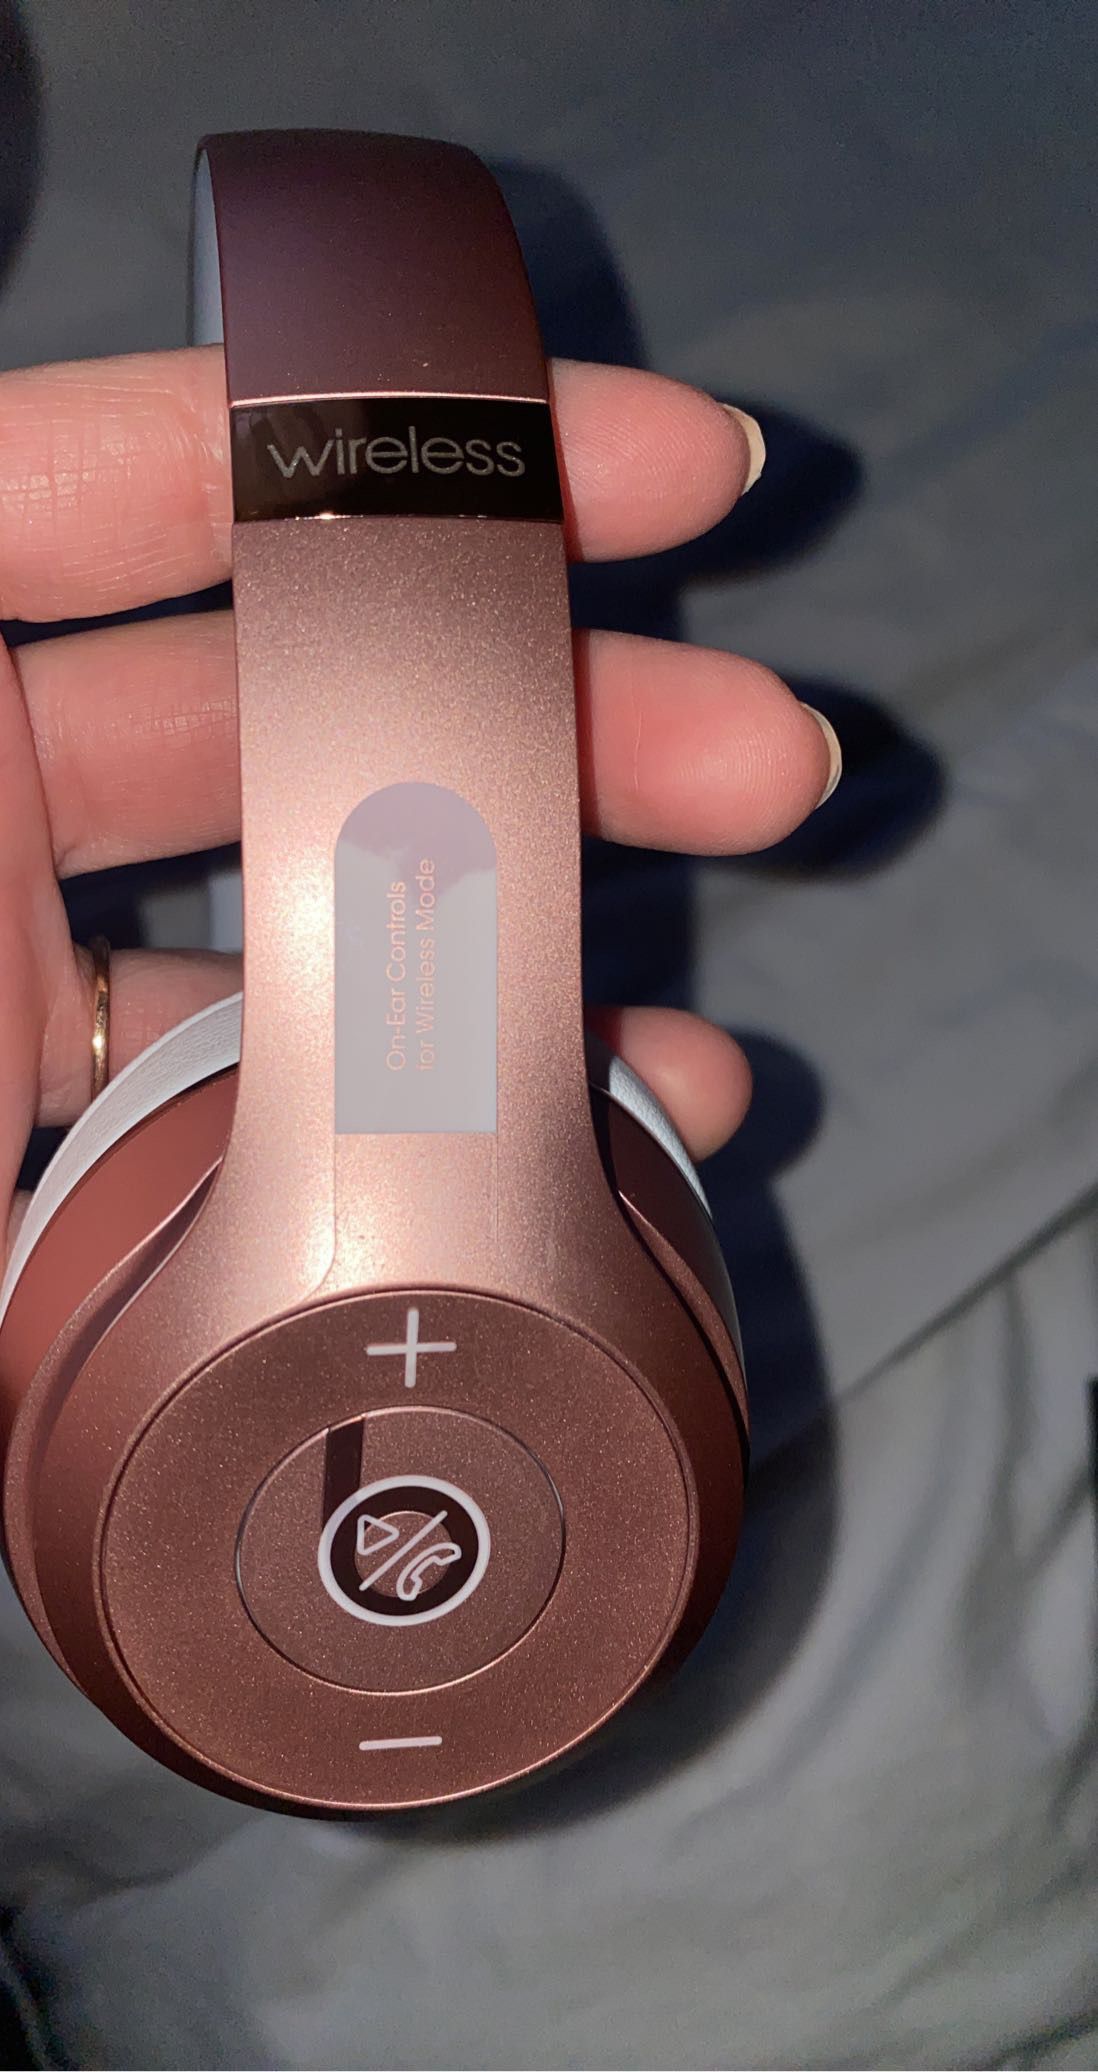 Beats Solo 3 Rose Gold